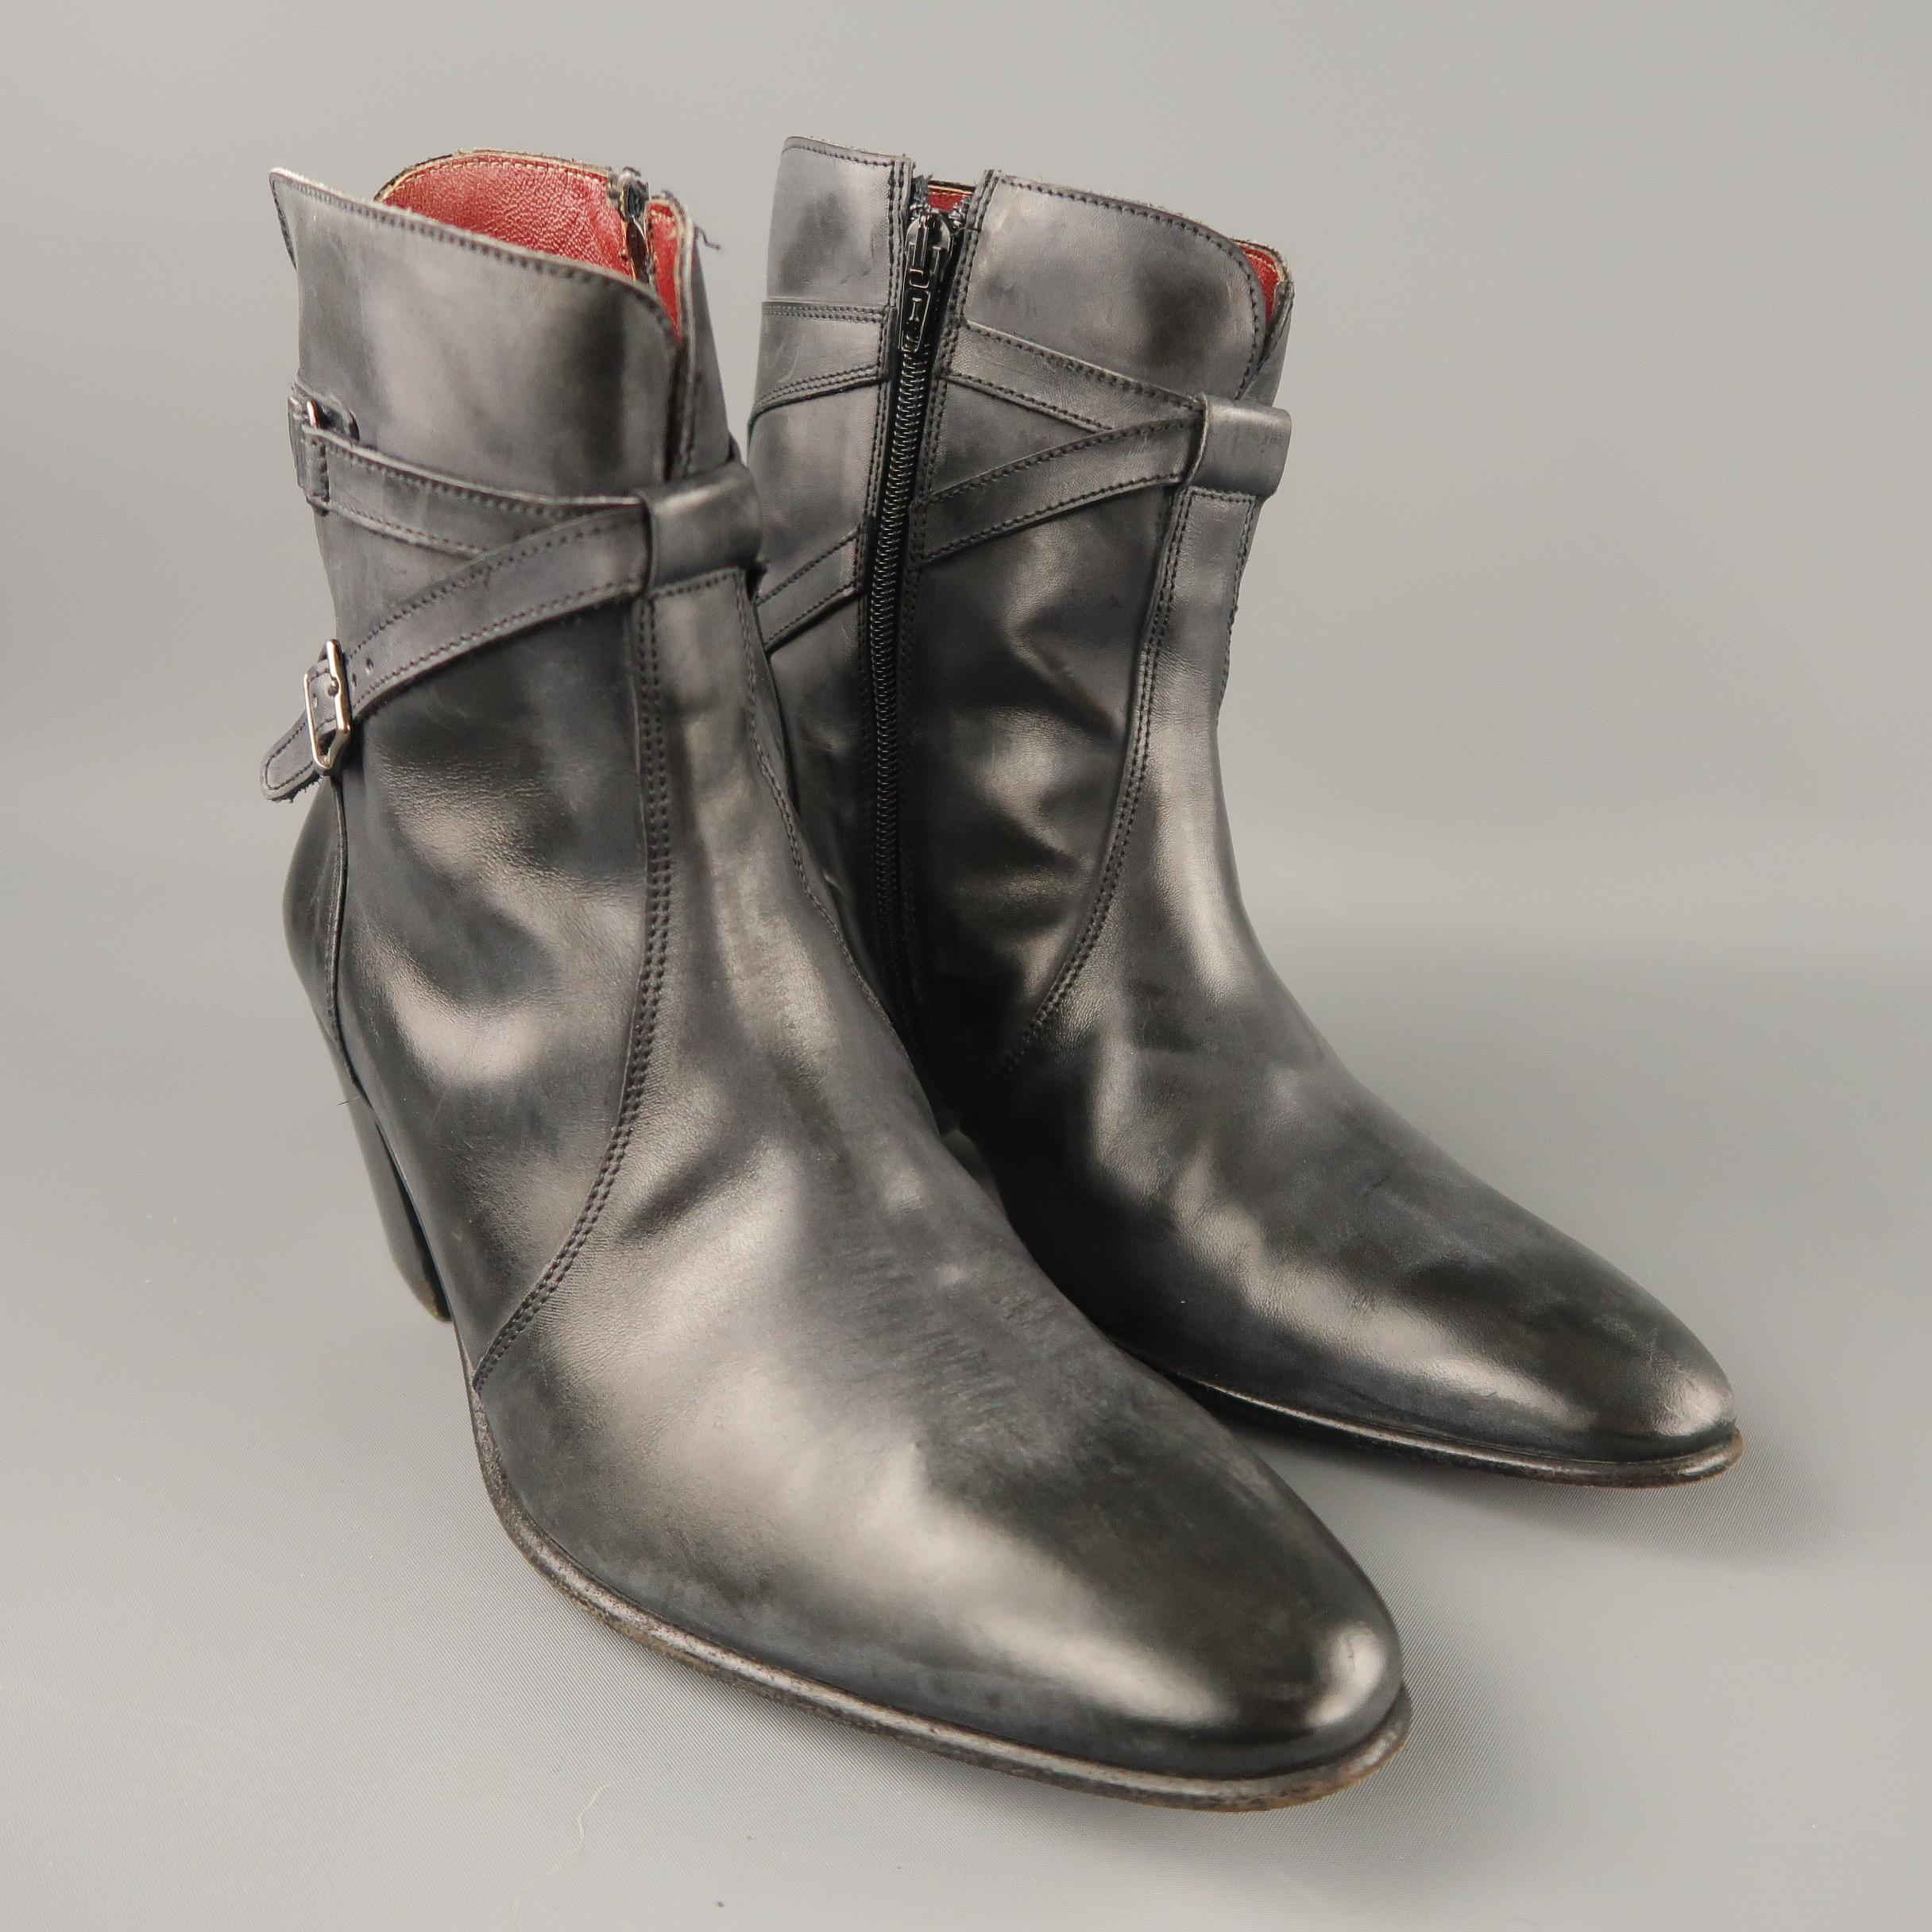 JEAN-MICHAEL CAZABAT ankle boot comes in a black and grey antique leather, wrap around buckle details, and a side zipper closure with a wooden heel. Made in Italy.
 
Excellent Pre-Owned Condition.
Marked: 40
 
Measurements:
 
Length: 10.5 in.
Width: